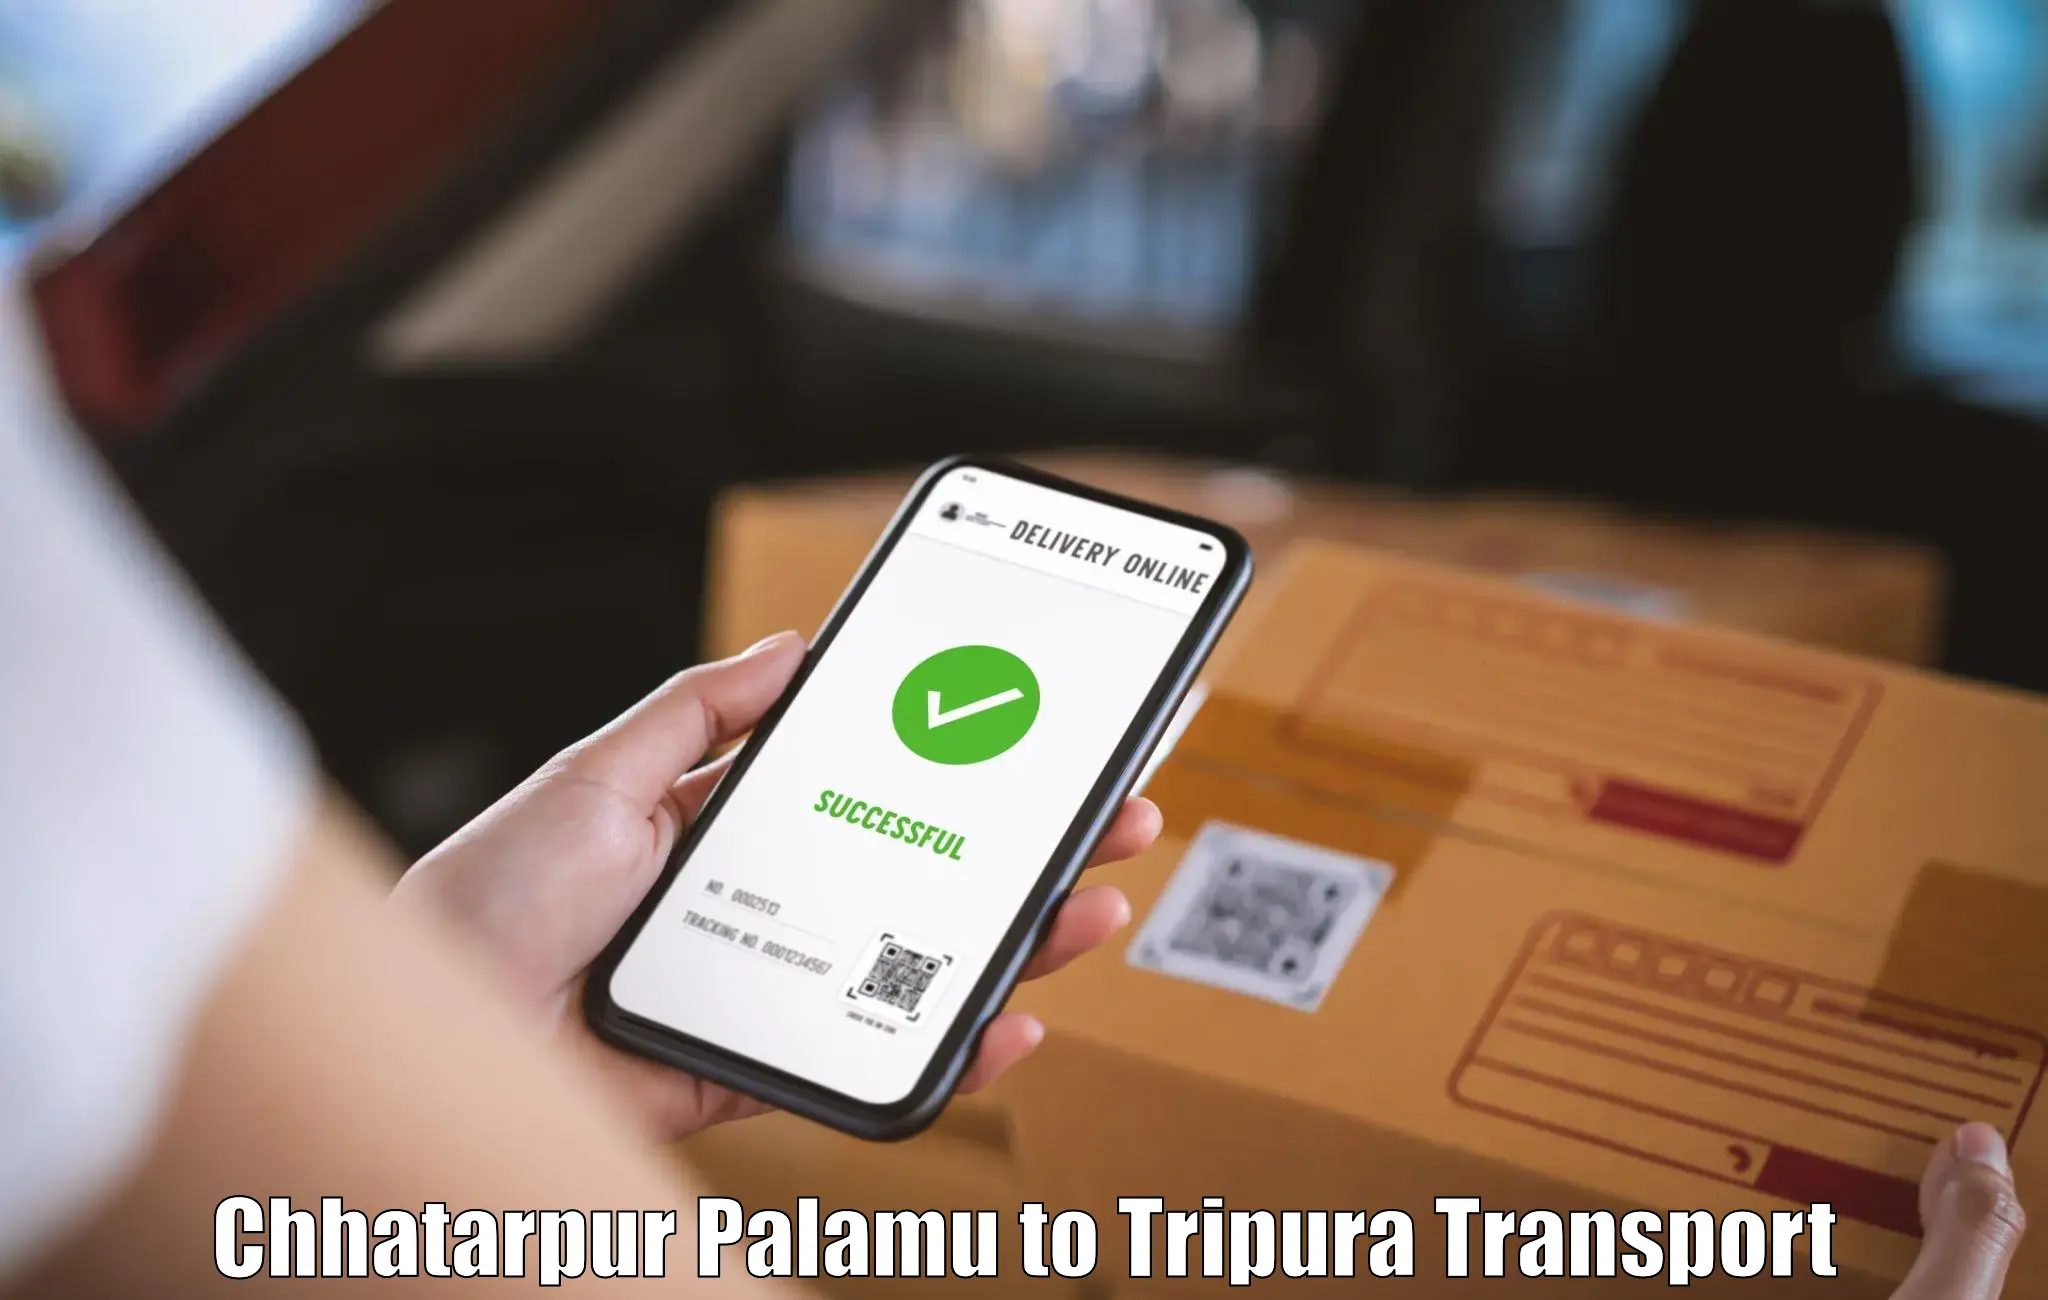 Container transport service in Chhatarpur Palamu to Dhalai